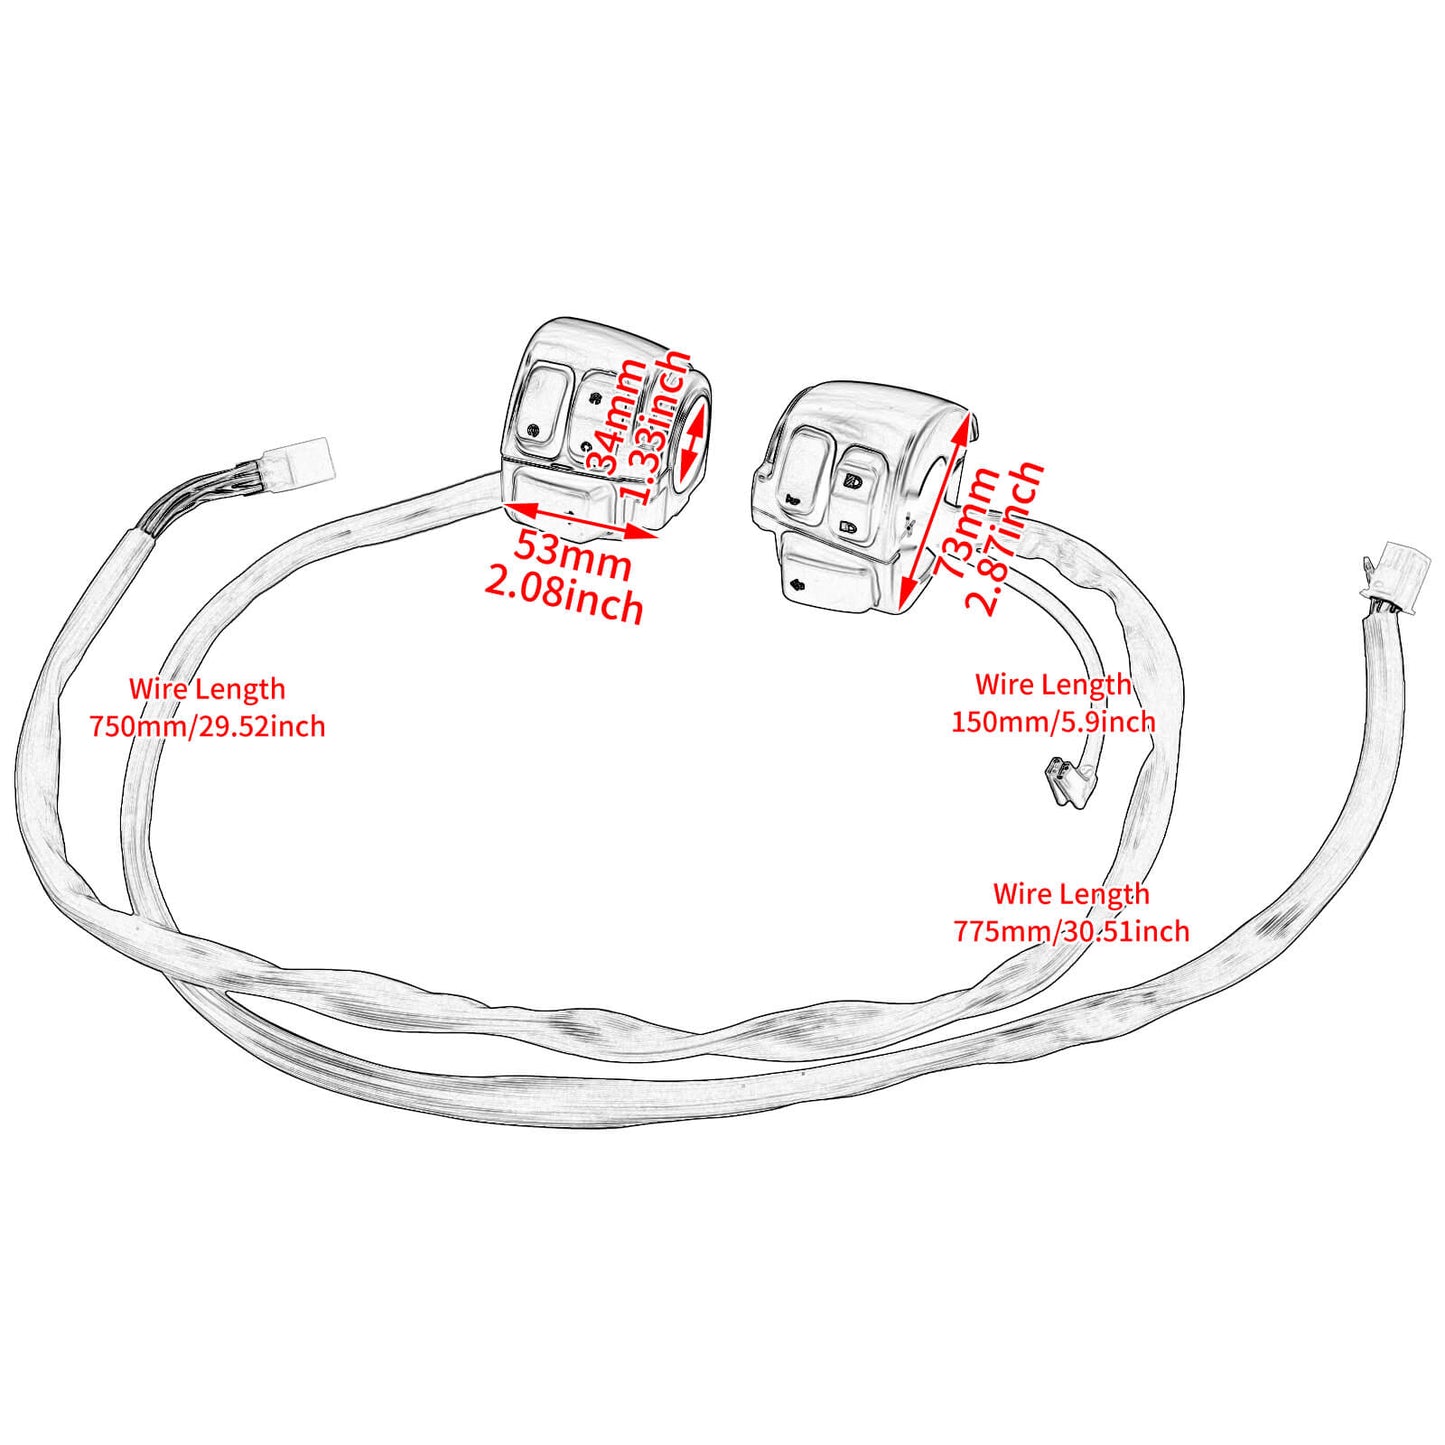 TH009401-harley-sportster-handlebar-control-switches-size